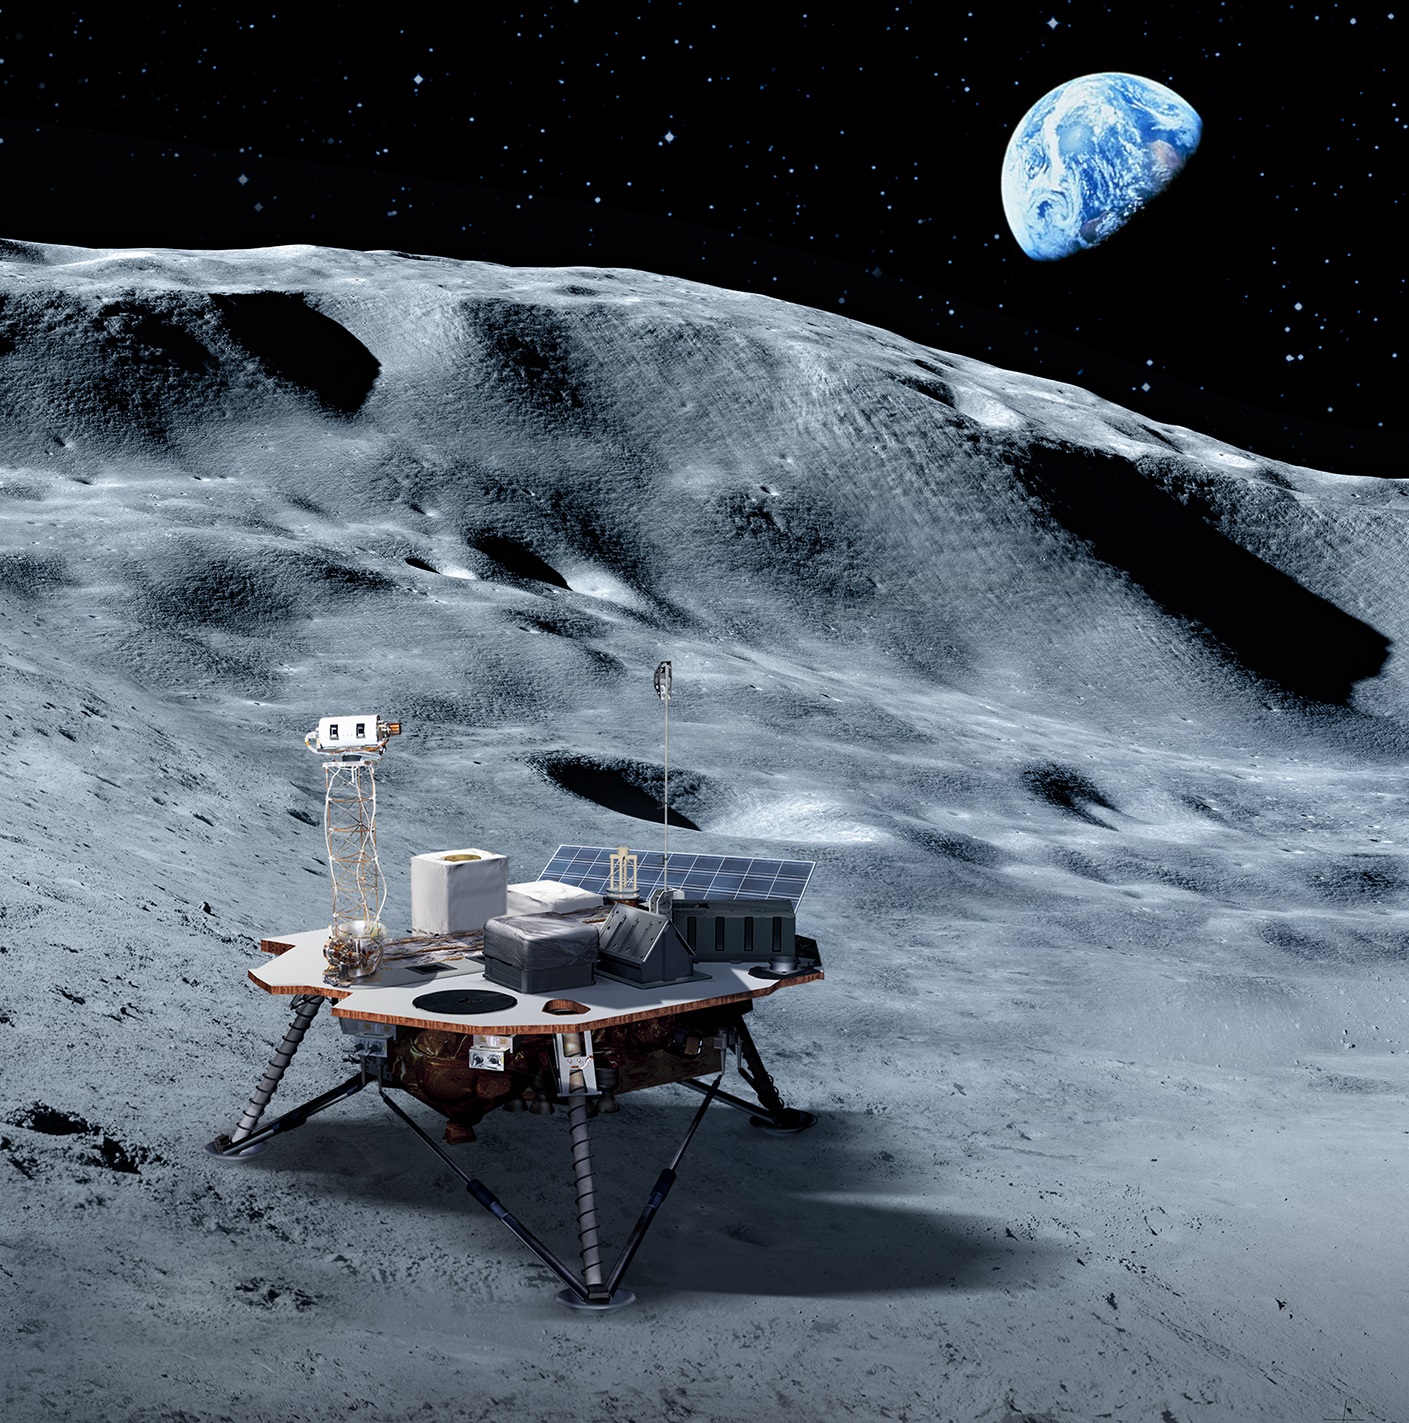 Artist's impression of a CLPS mission on the moon.